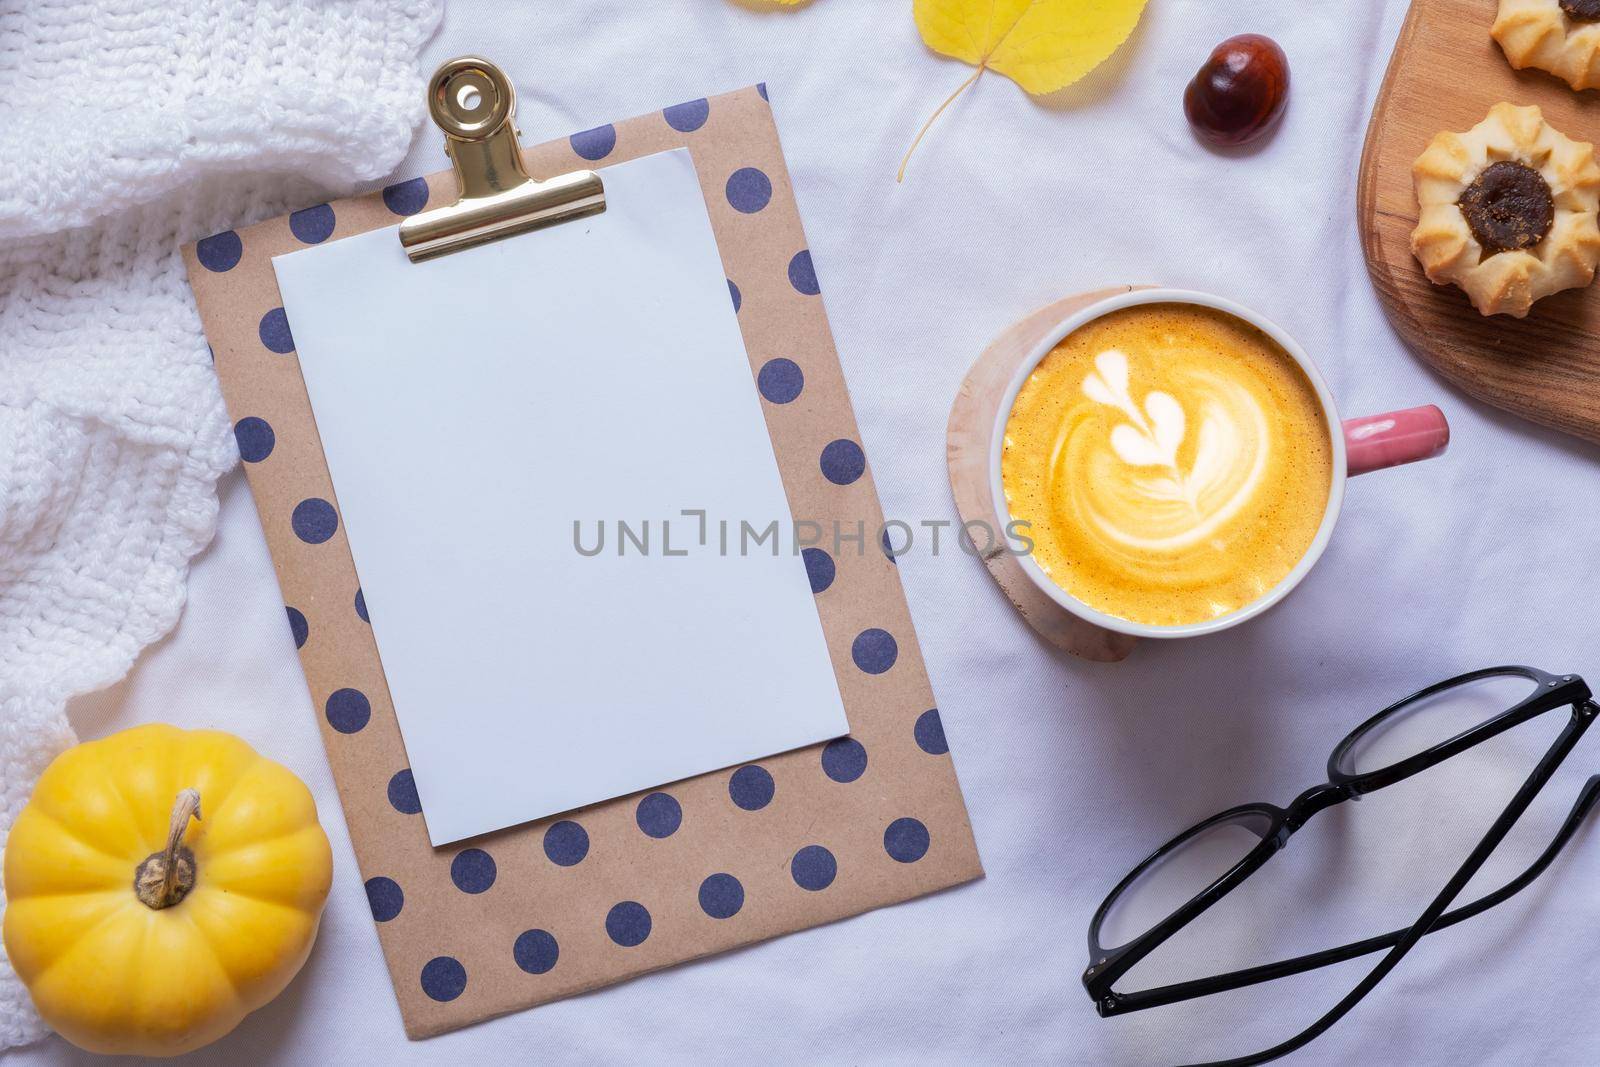 Blank sheet of paper and latte cup with autumn cozy decor top view. Copy space for autumn text.